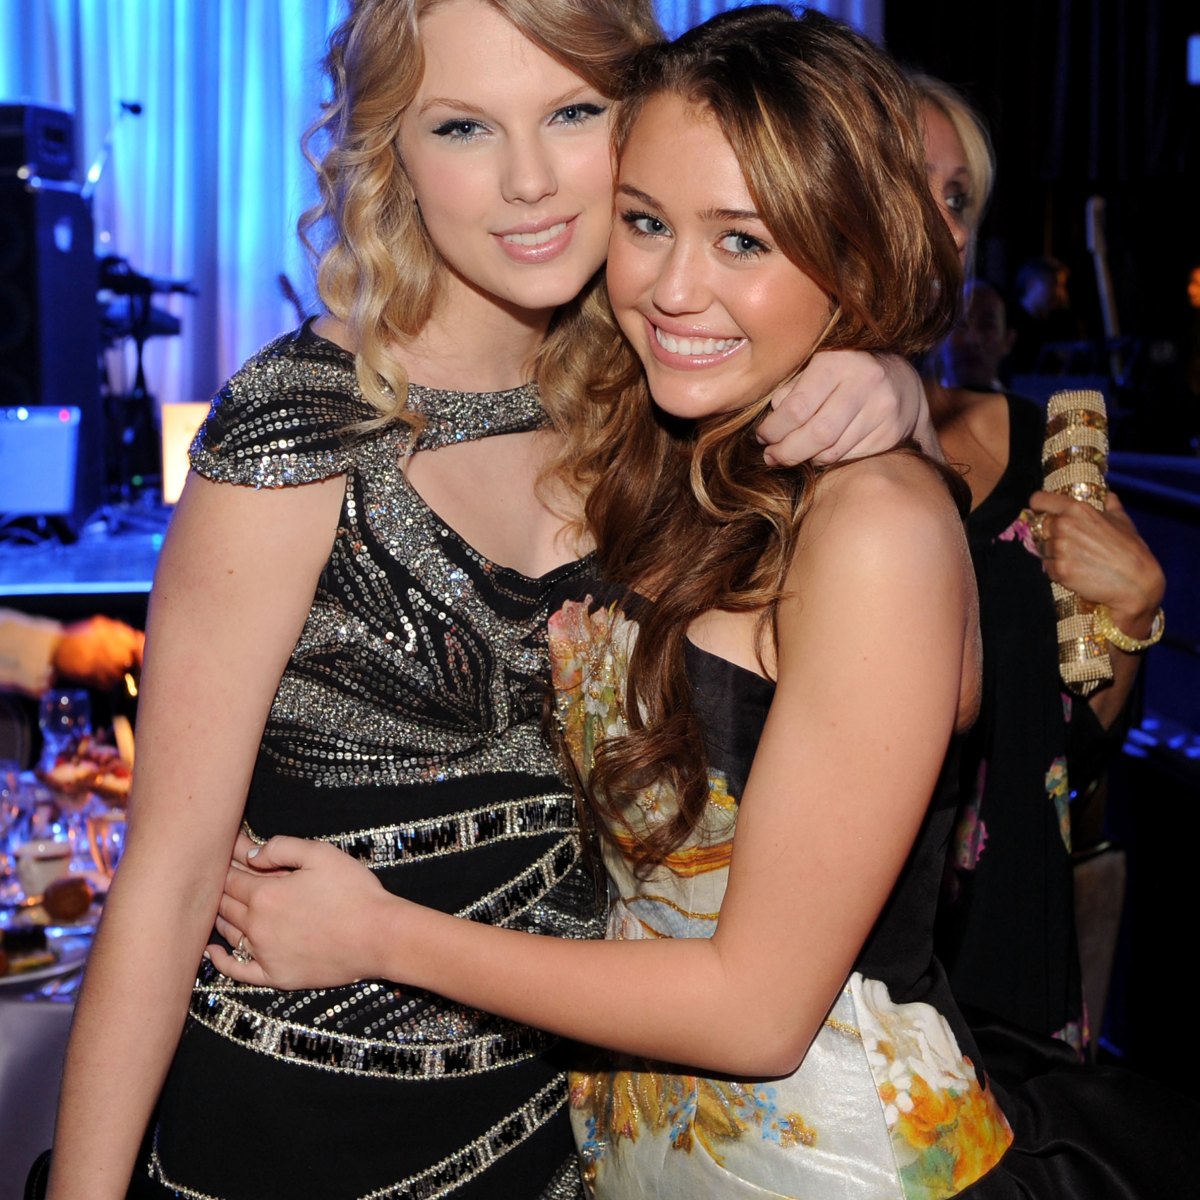 You'll Never Believe What Miley Cyrus Said About Taylor Swift - J-14 | J-14